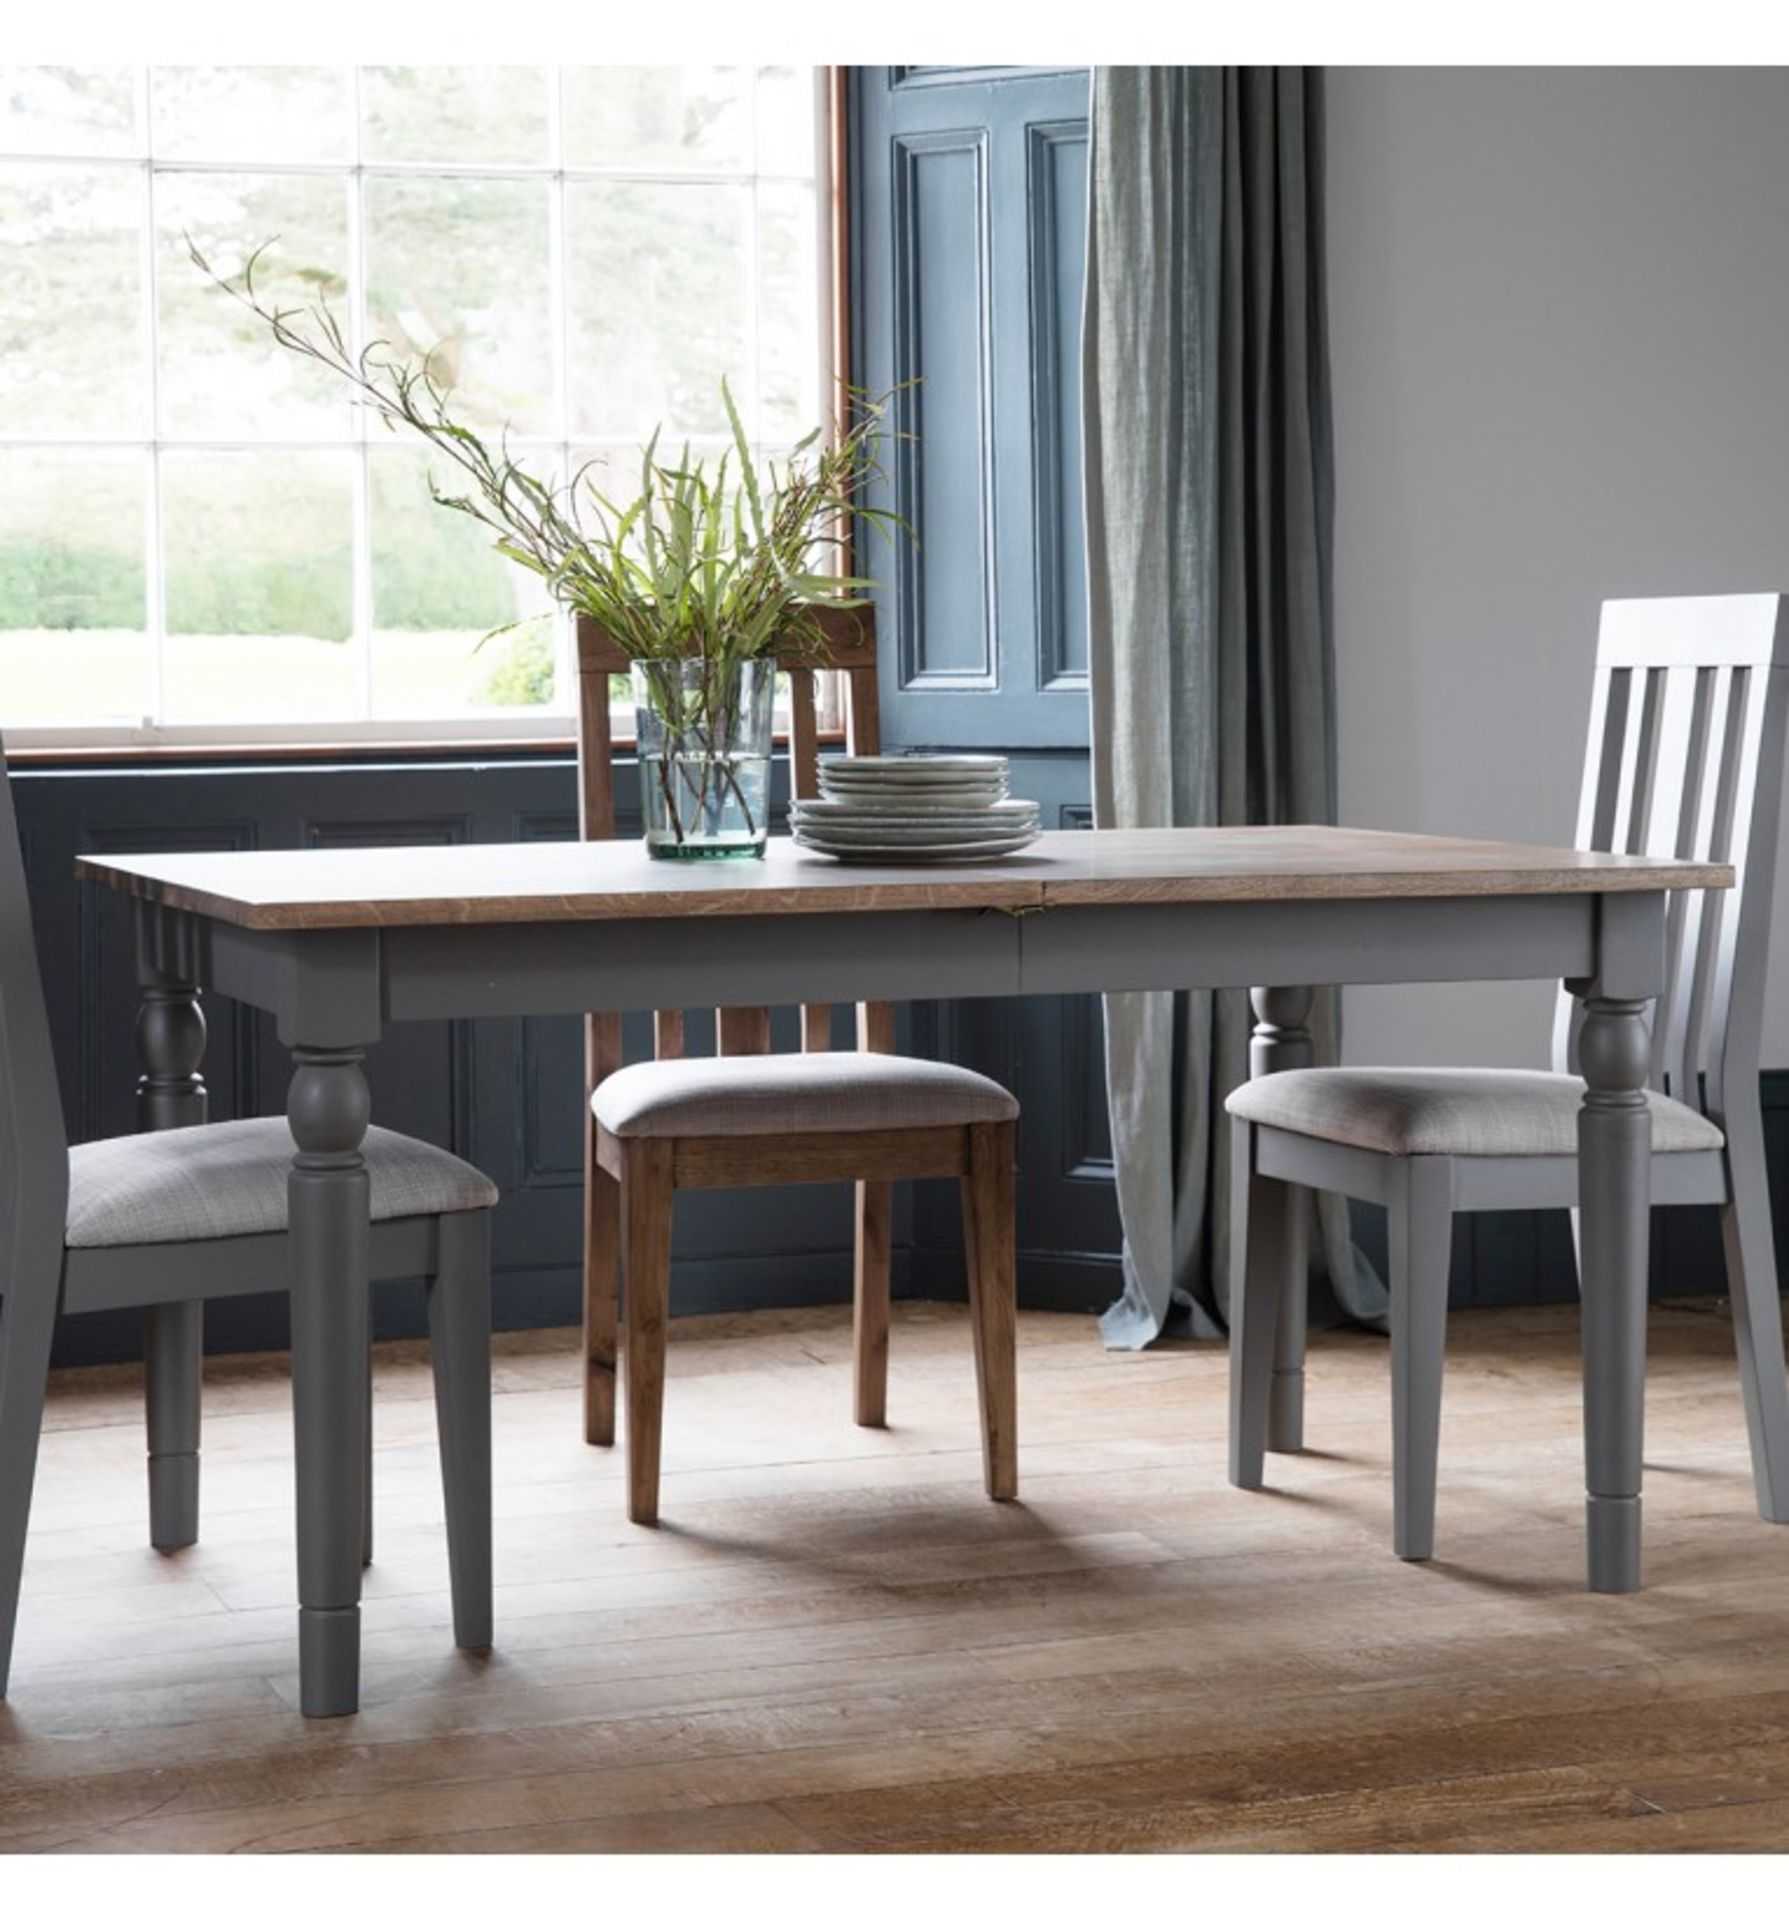 Cookham Extending Dining Table Grey A 2 leaf table extending to 2400mm seating up to 10 people